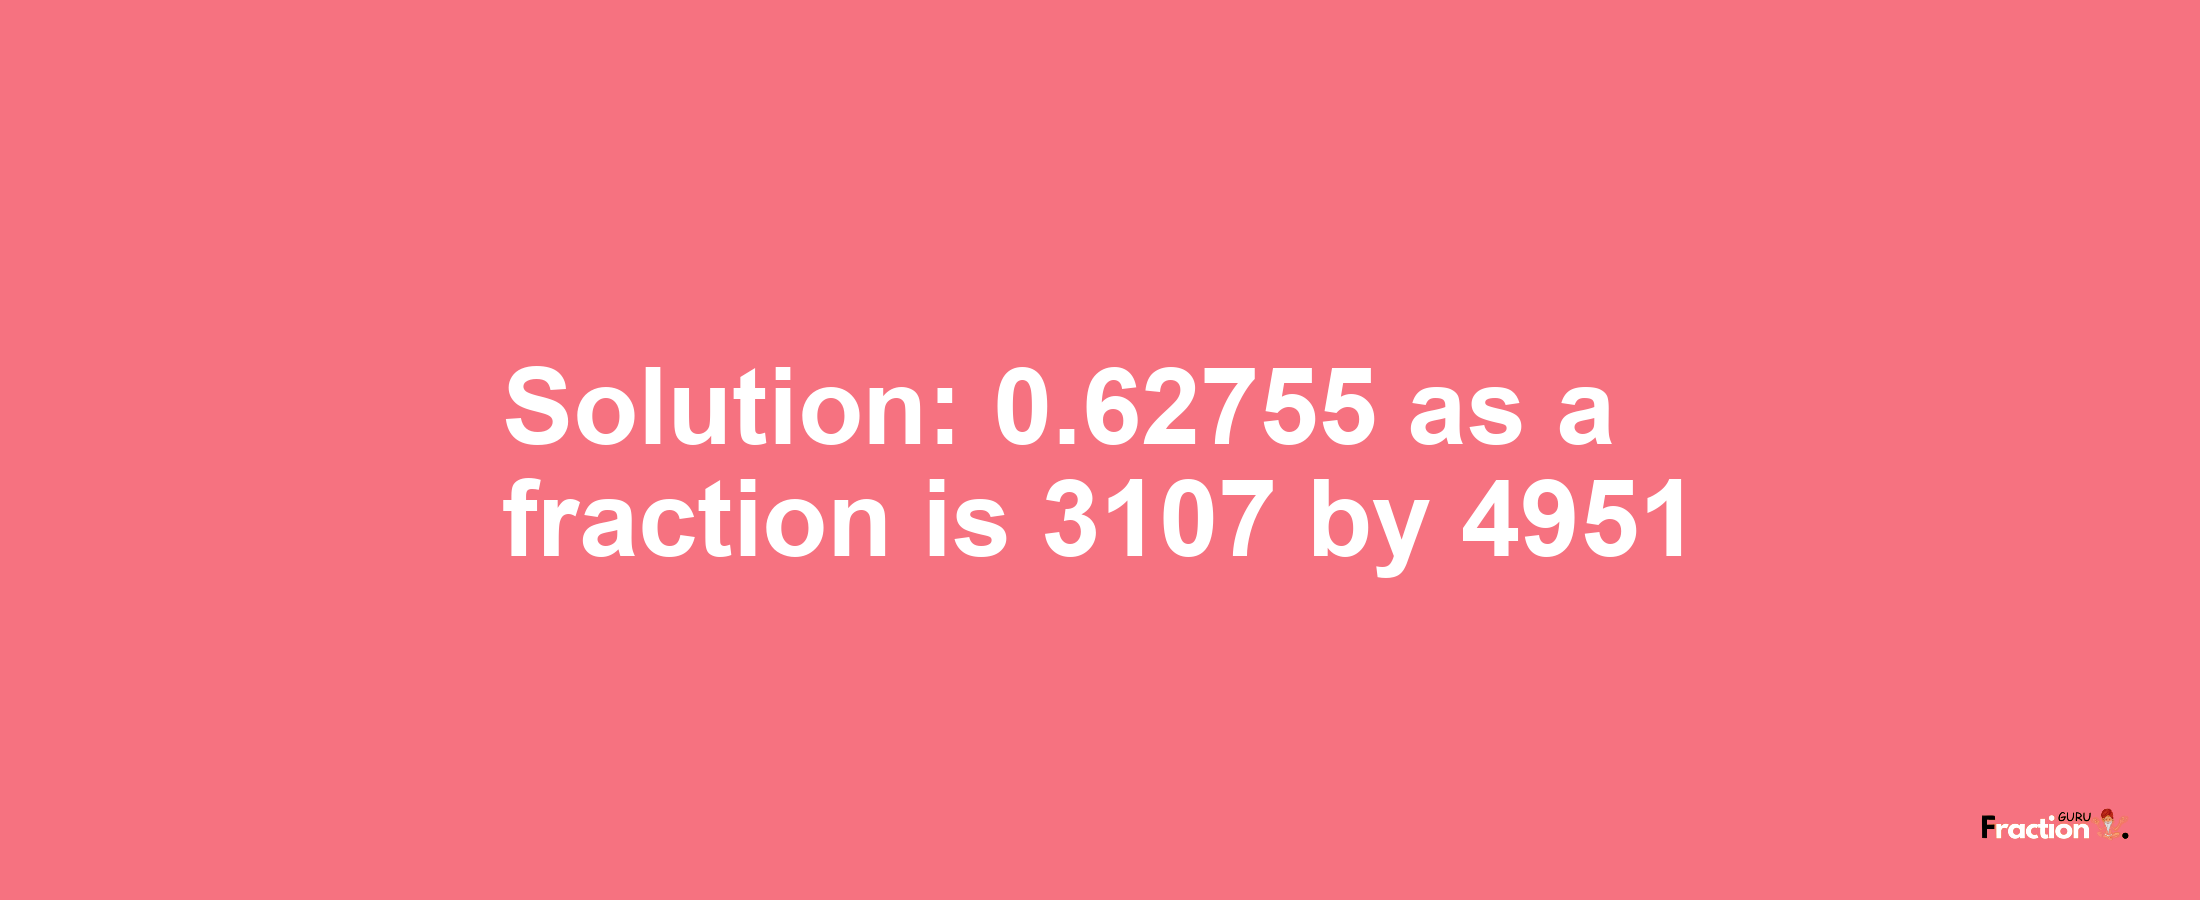 Solution:0.62755 as a fraction is 3107/4951